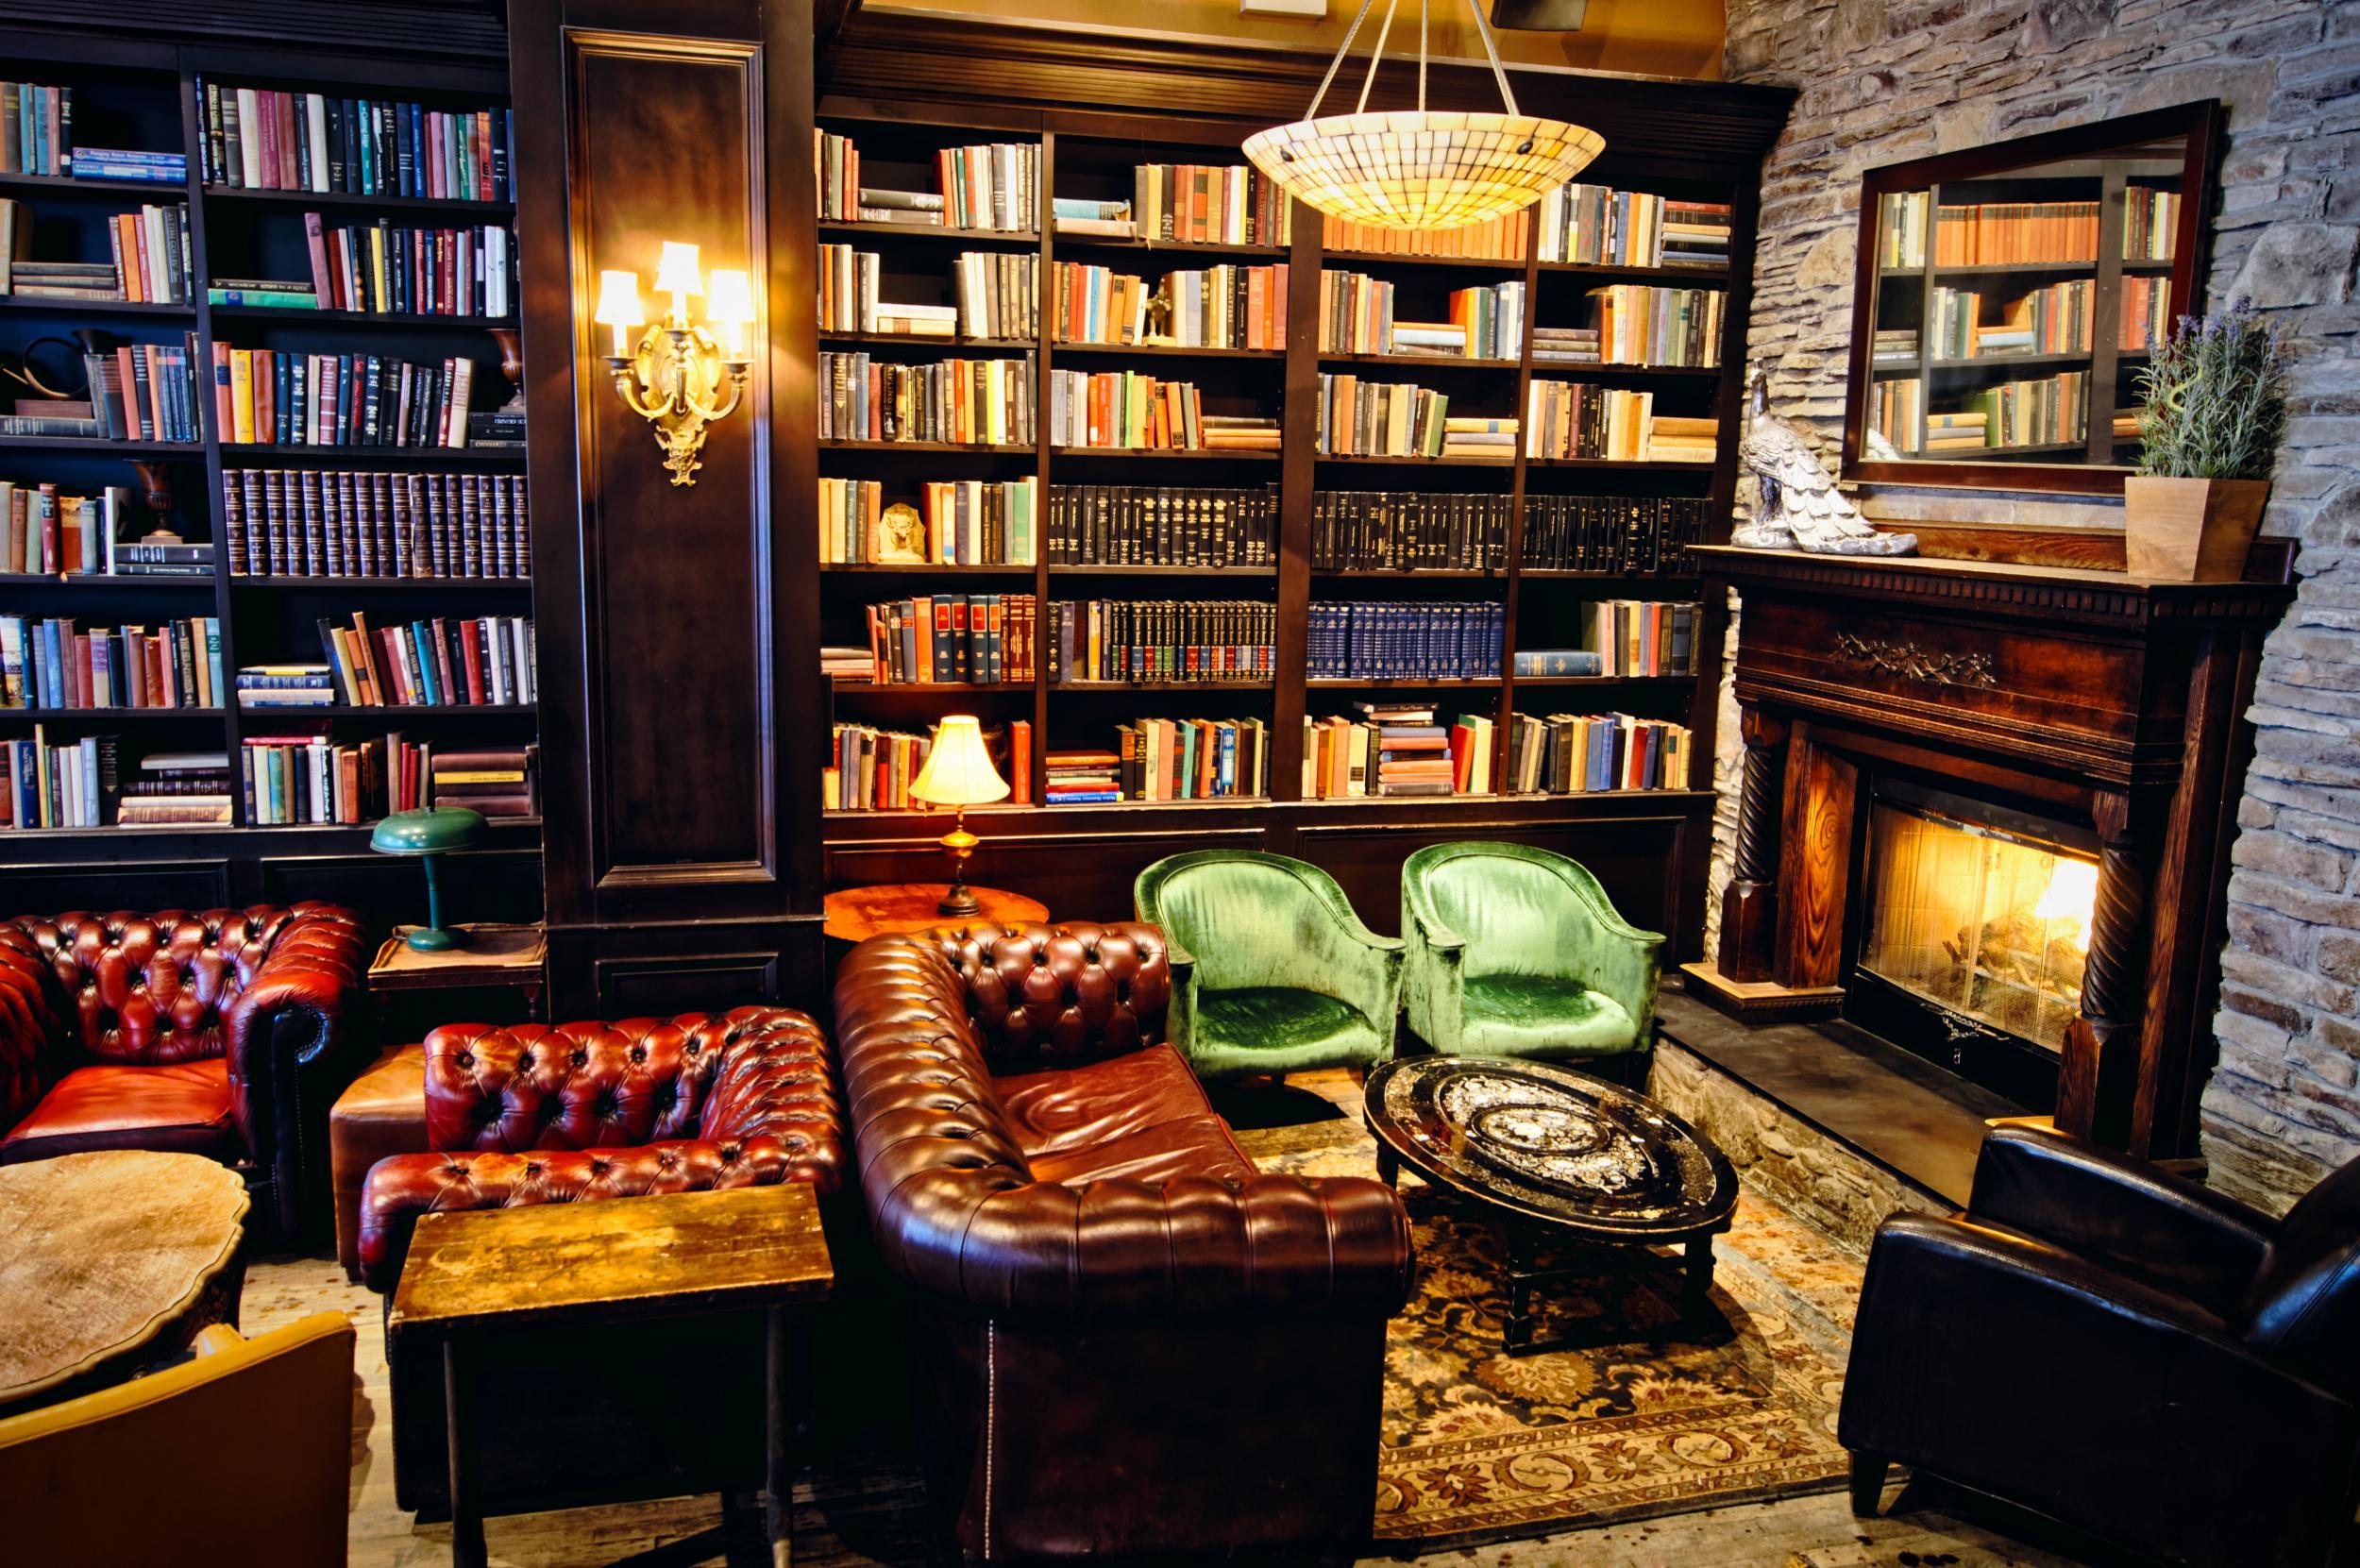 Or simply cosy up in Union Hall's inviting library room